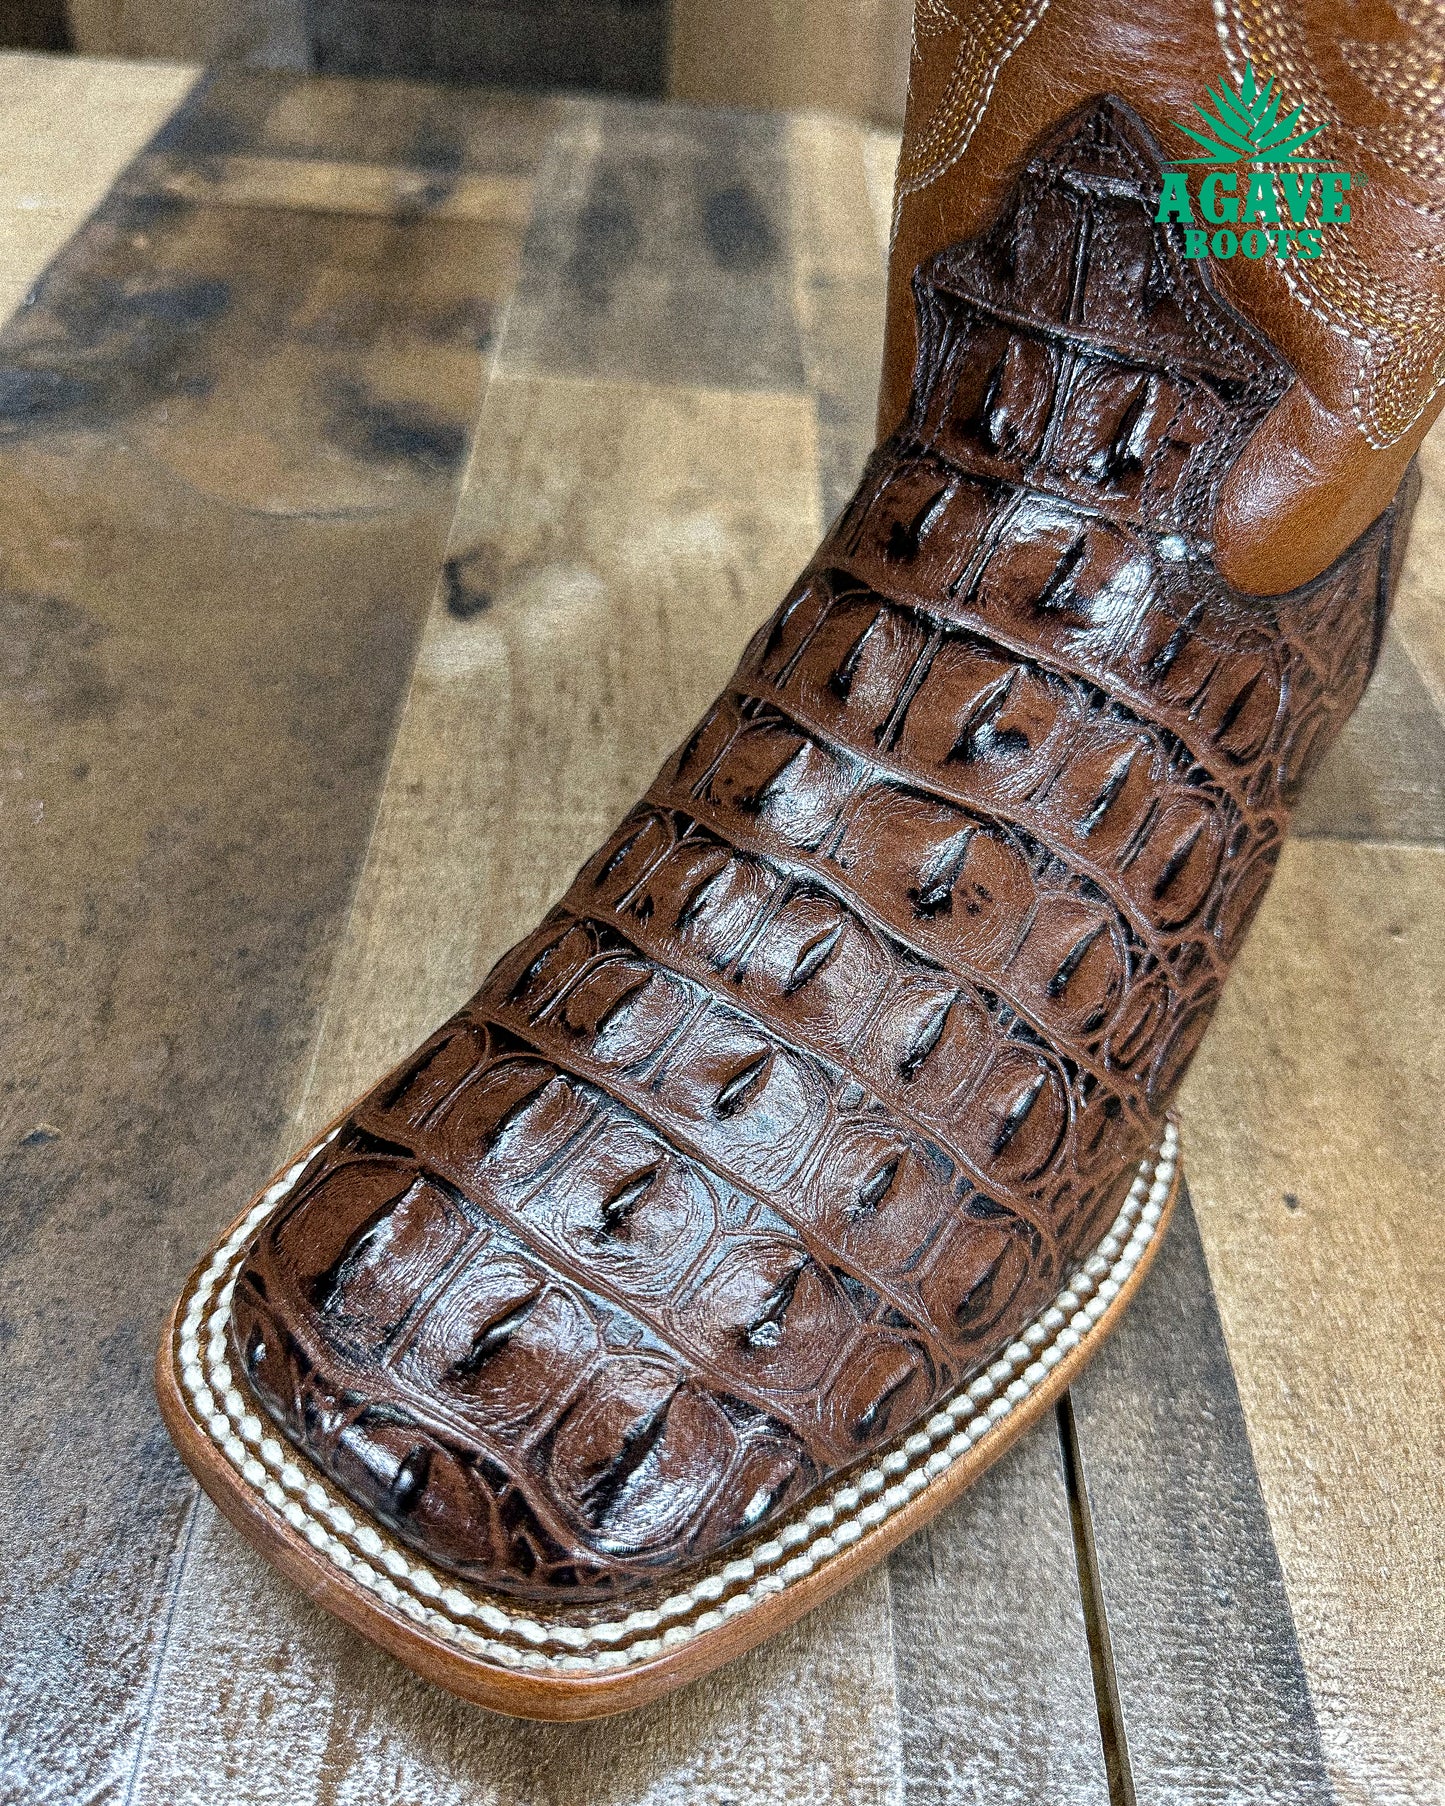 NILE CAIMAN BELLY BROWN  | MEN SQUARE TOE WESTERN COWBOY BOOTS